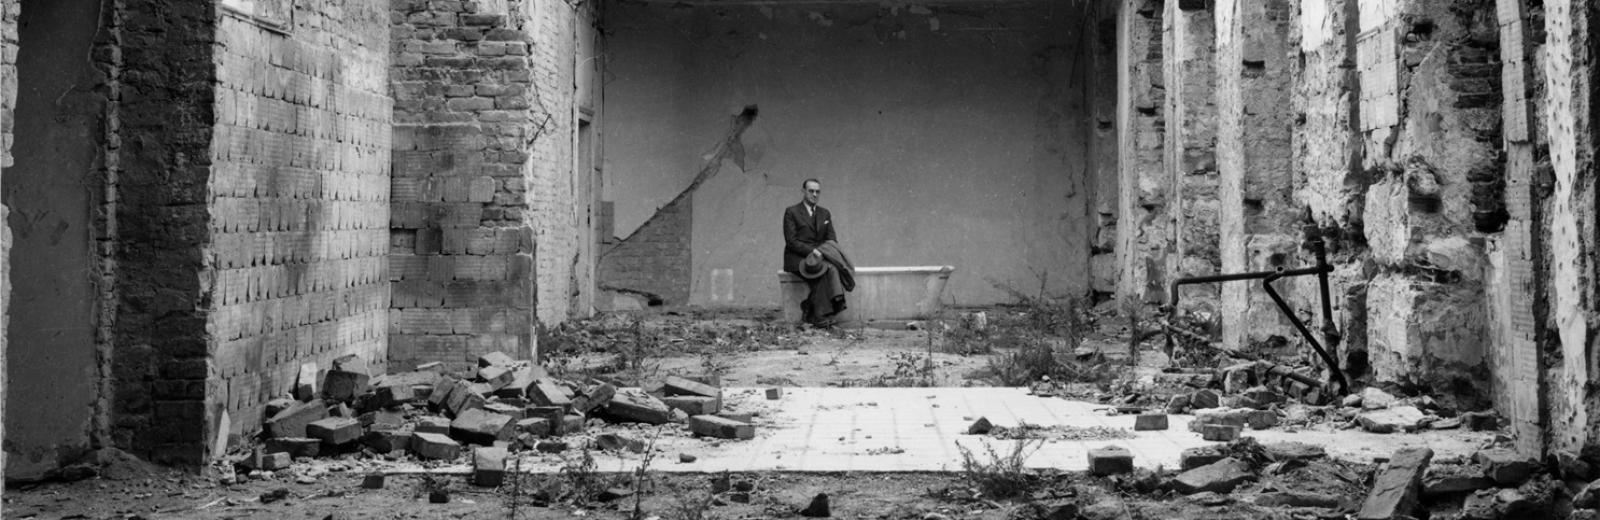 Carl Lutz in the inner courtyard of the destroyed British legation © Archives of Contemporary History, ETH Zurich / Agnes Hirschi